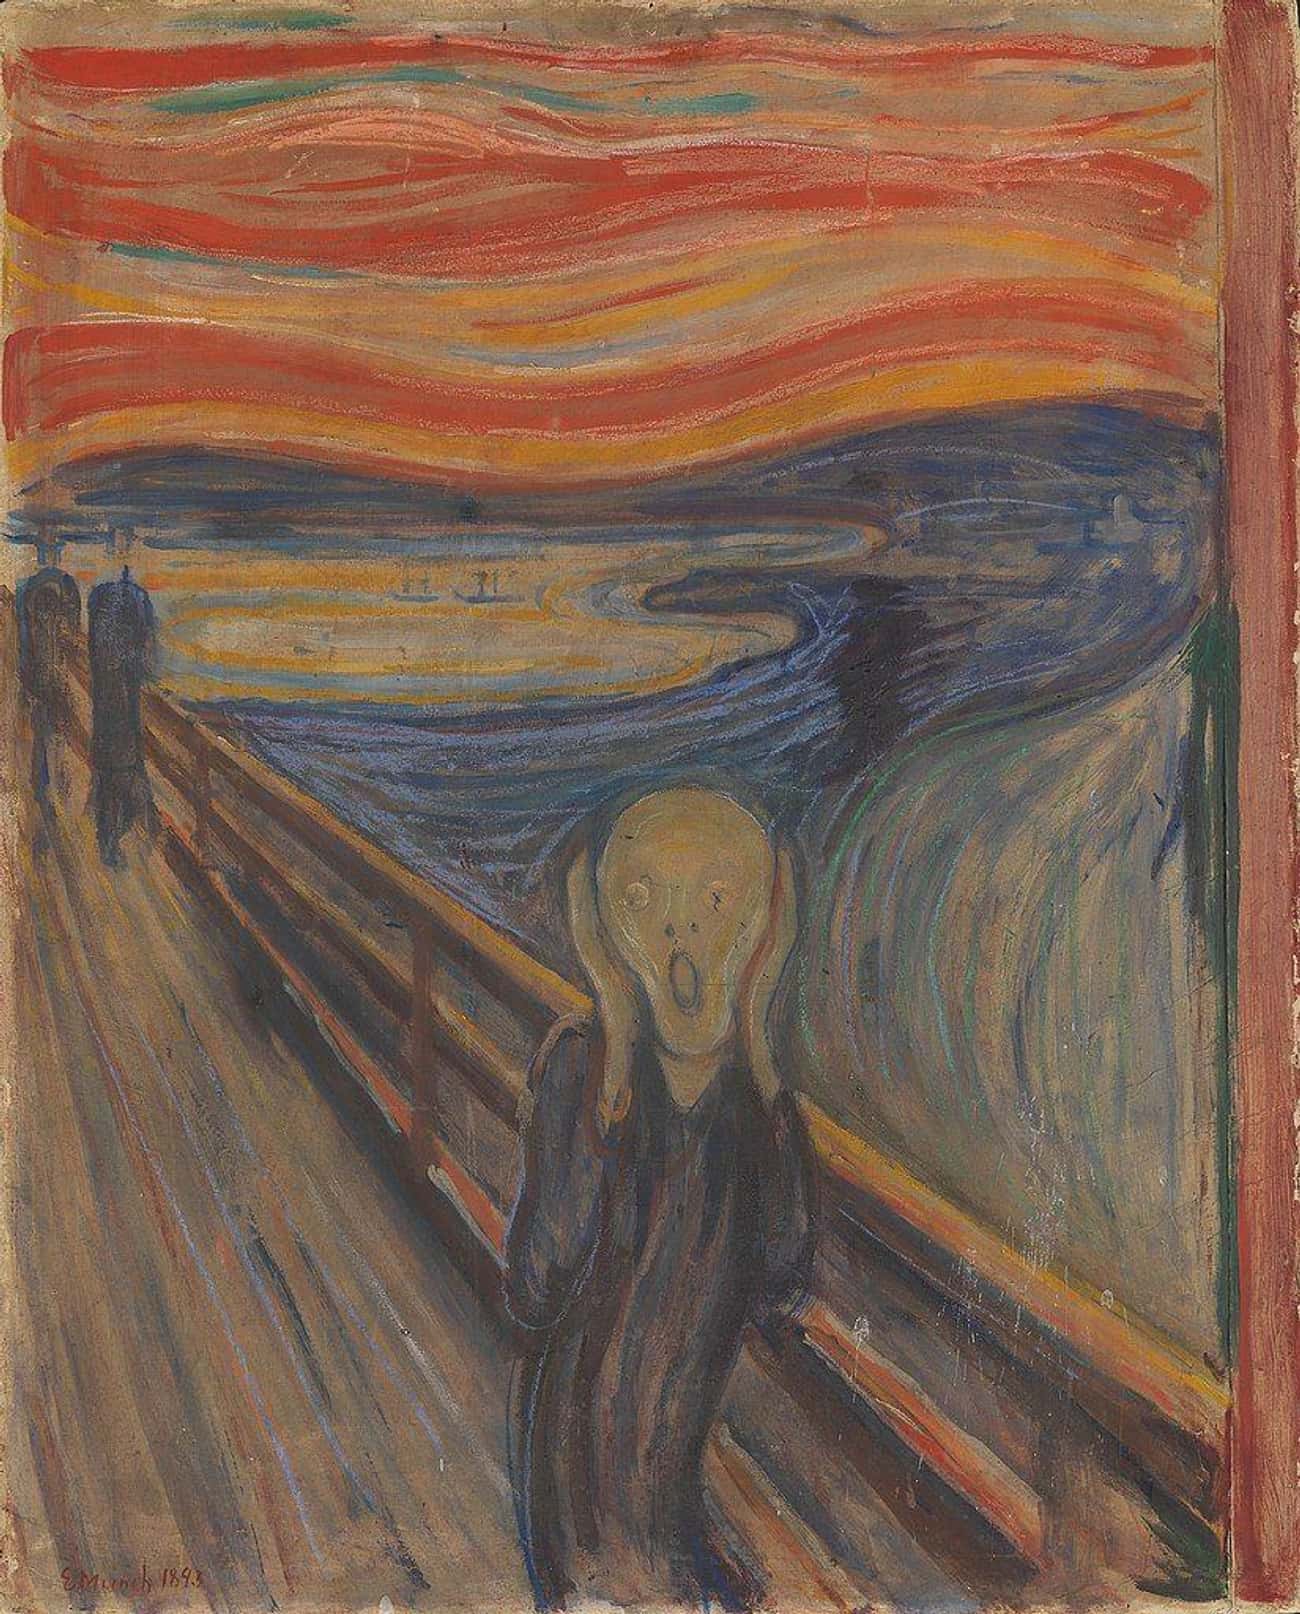 Aries (March 21 - April 19): Munch's 'The Scream' 